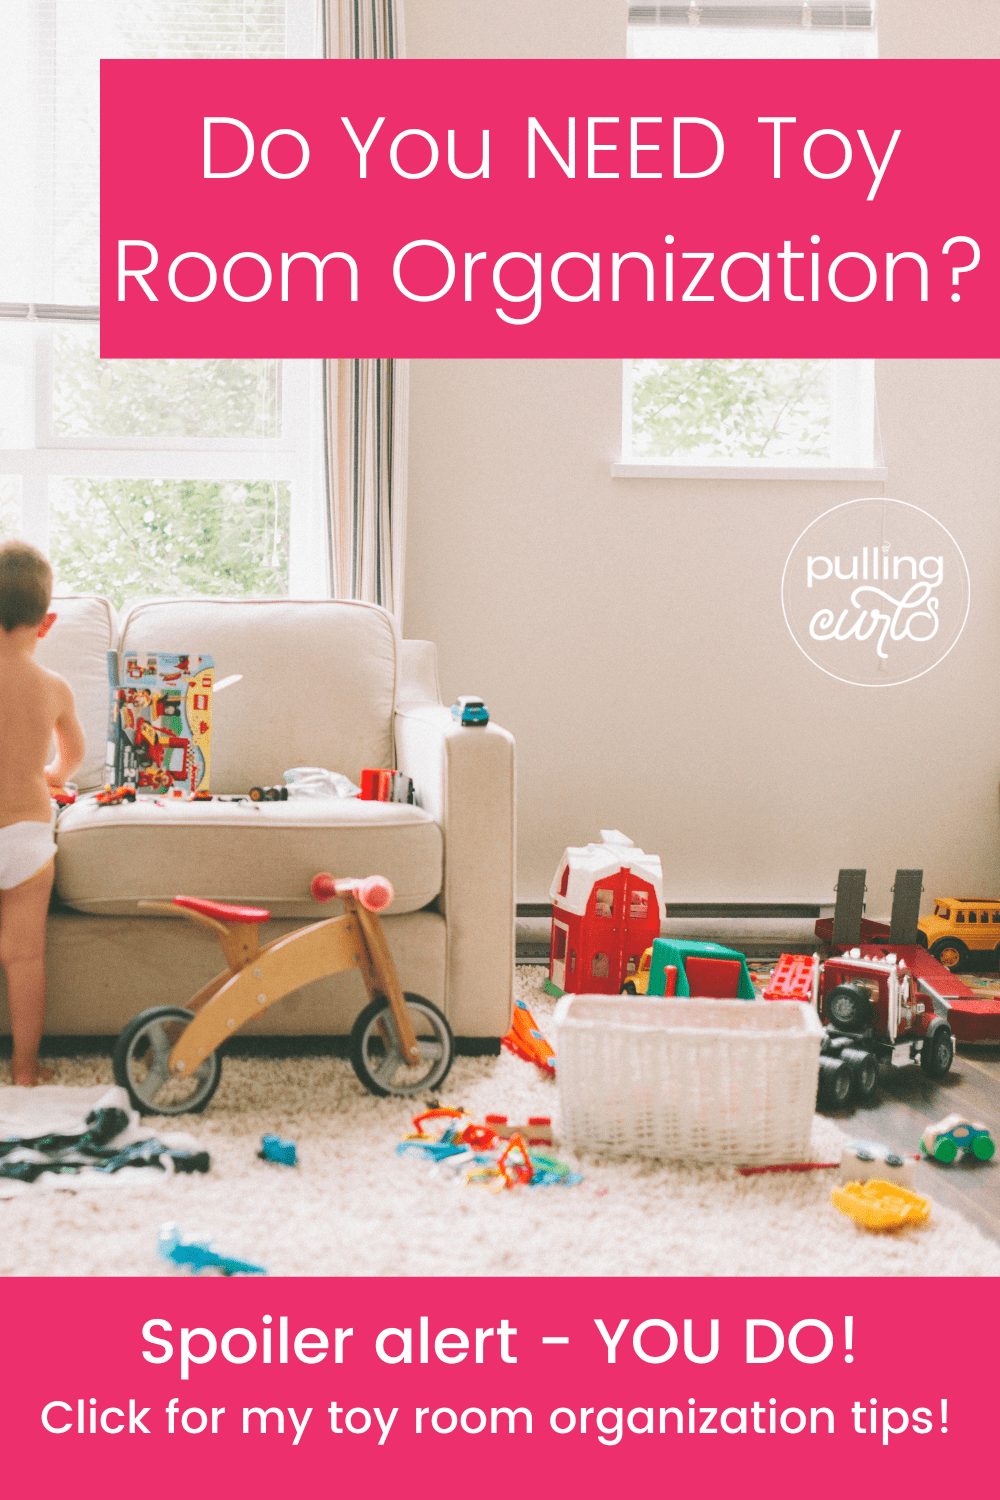 Everyone is looking for playroom ideas -- having small spaces to store many toys is a big problem -- but easily fixed! via @pullingcurls